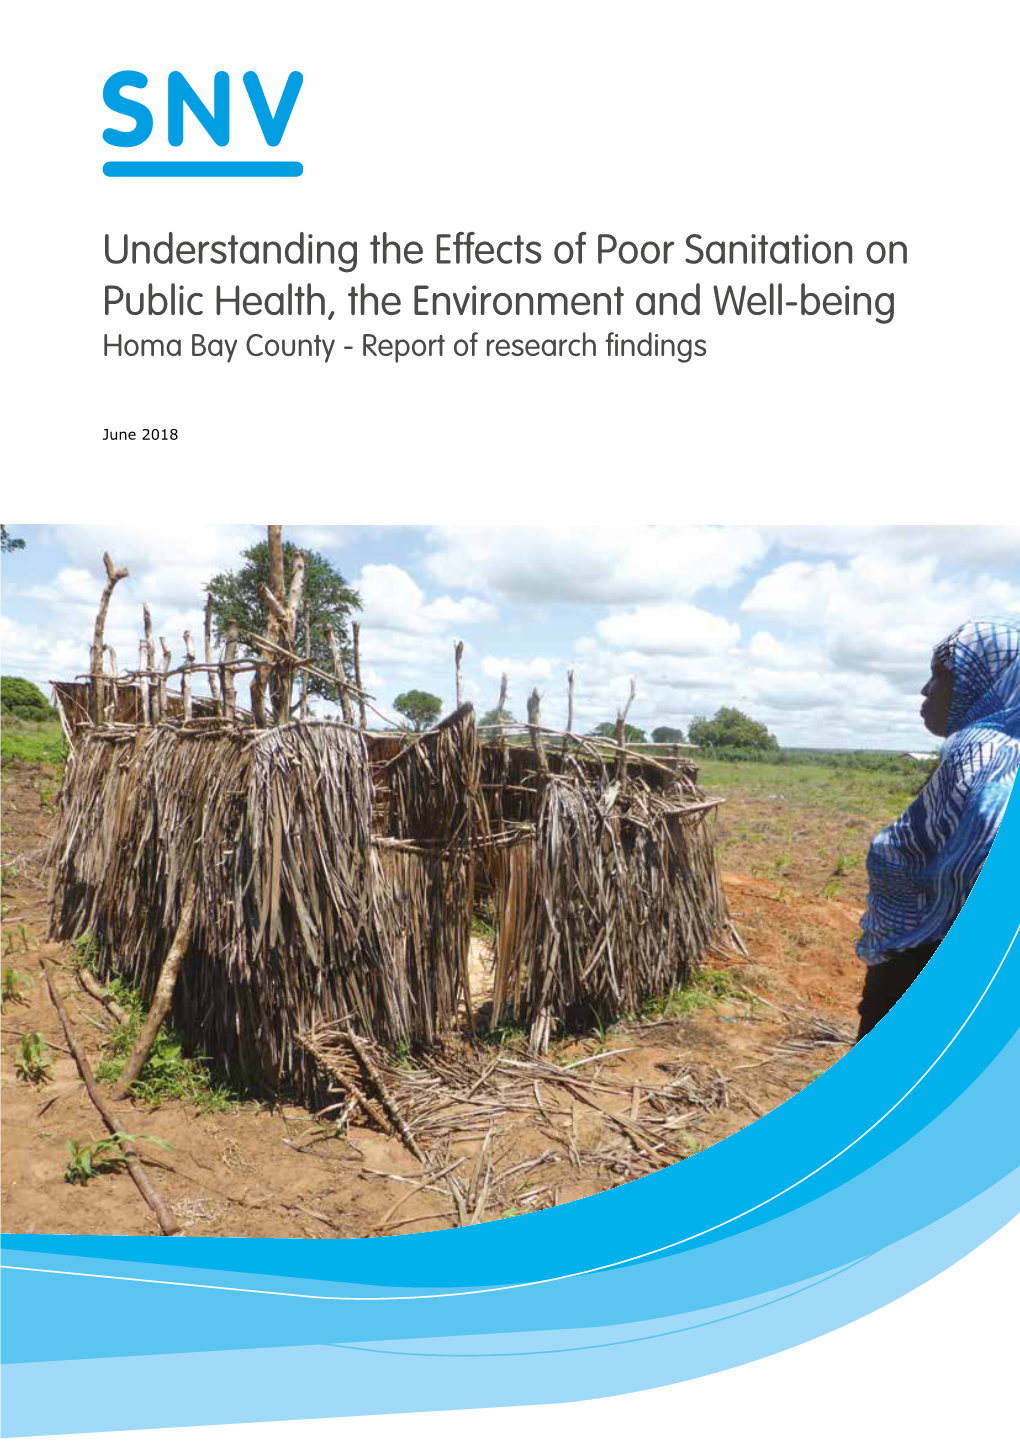 Understanding the Effects of Poor Sanitation on Public Health, the Environment and Well-Being Homa Bay County - Report of Research Findings